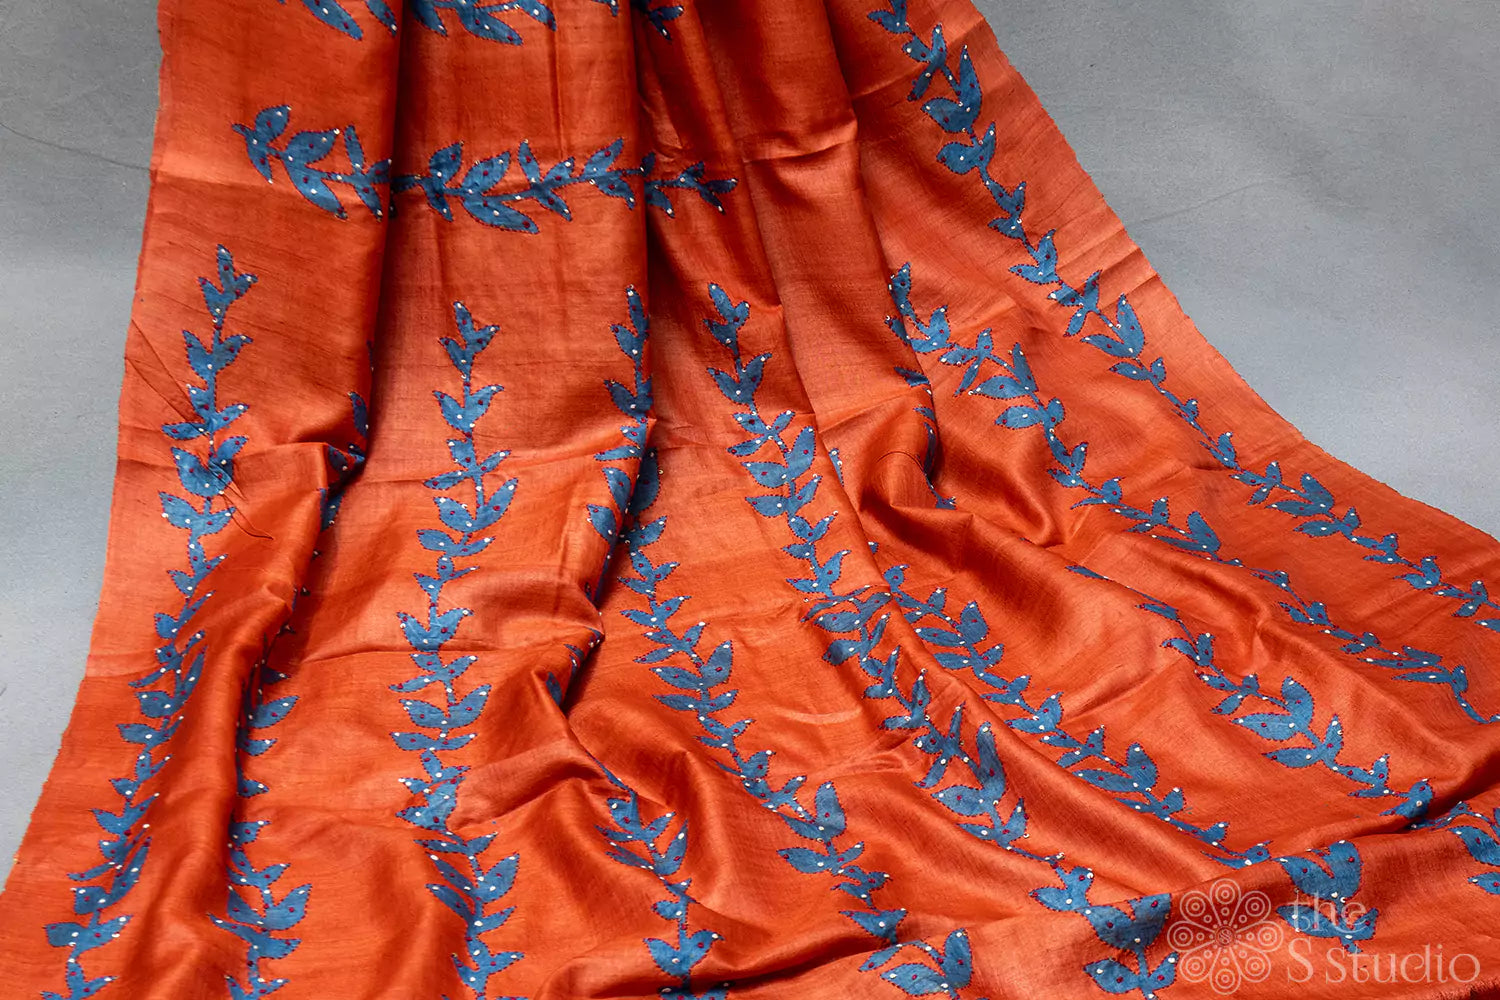 Orange tussar floral printed saree with embroidery